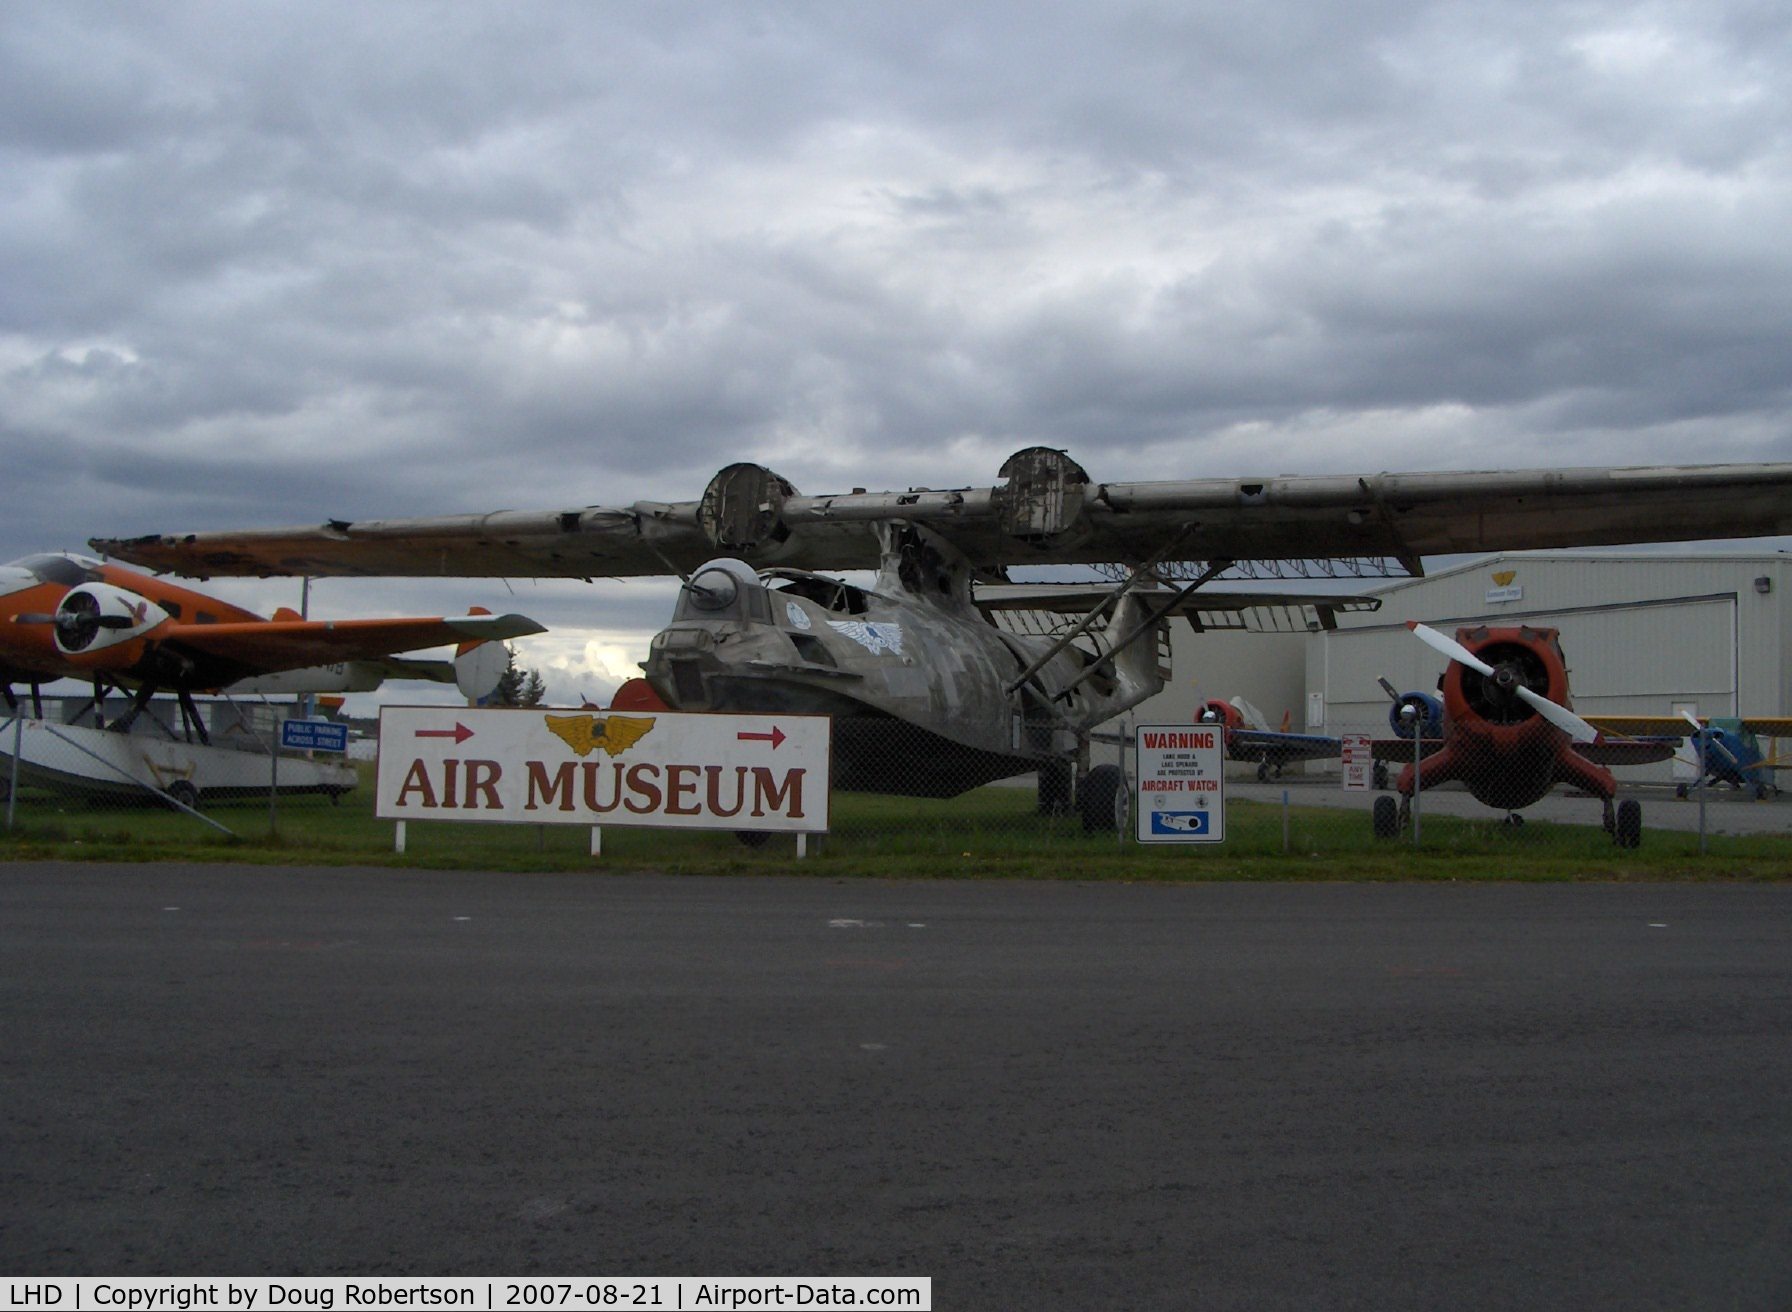 Lake Hood Seaplane Base (LHD) - Alaska Aviation Heritage Museum, fascinating exhibits indoors and out.